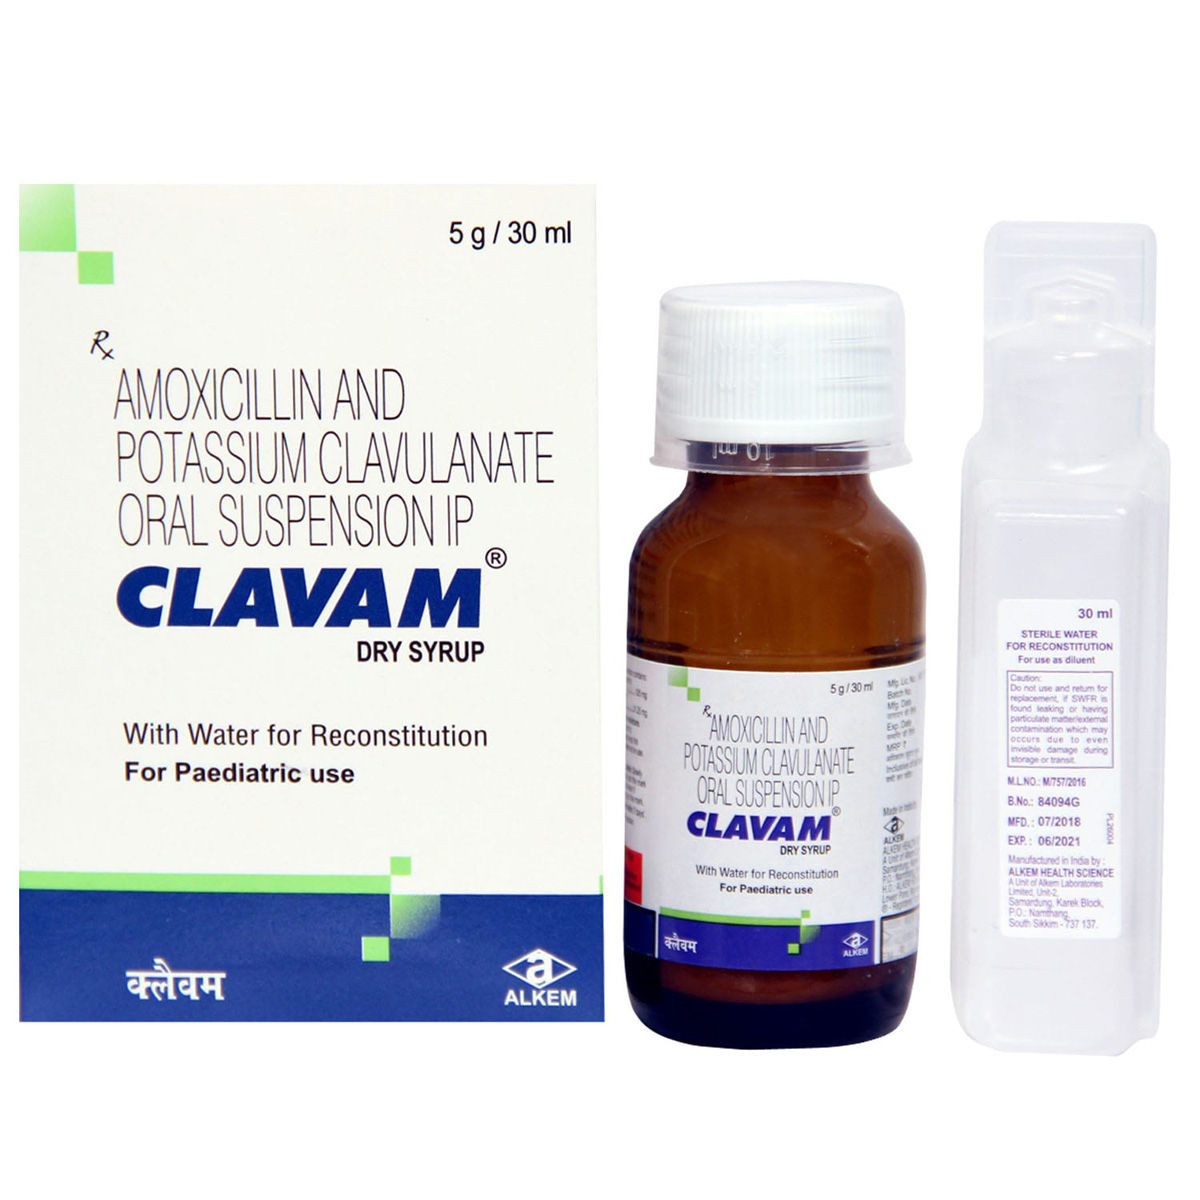 Clavam Dry Syrup 30 ml, Pack of 1 DRY SYRUP